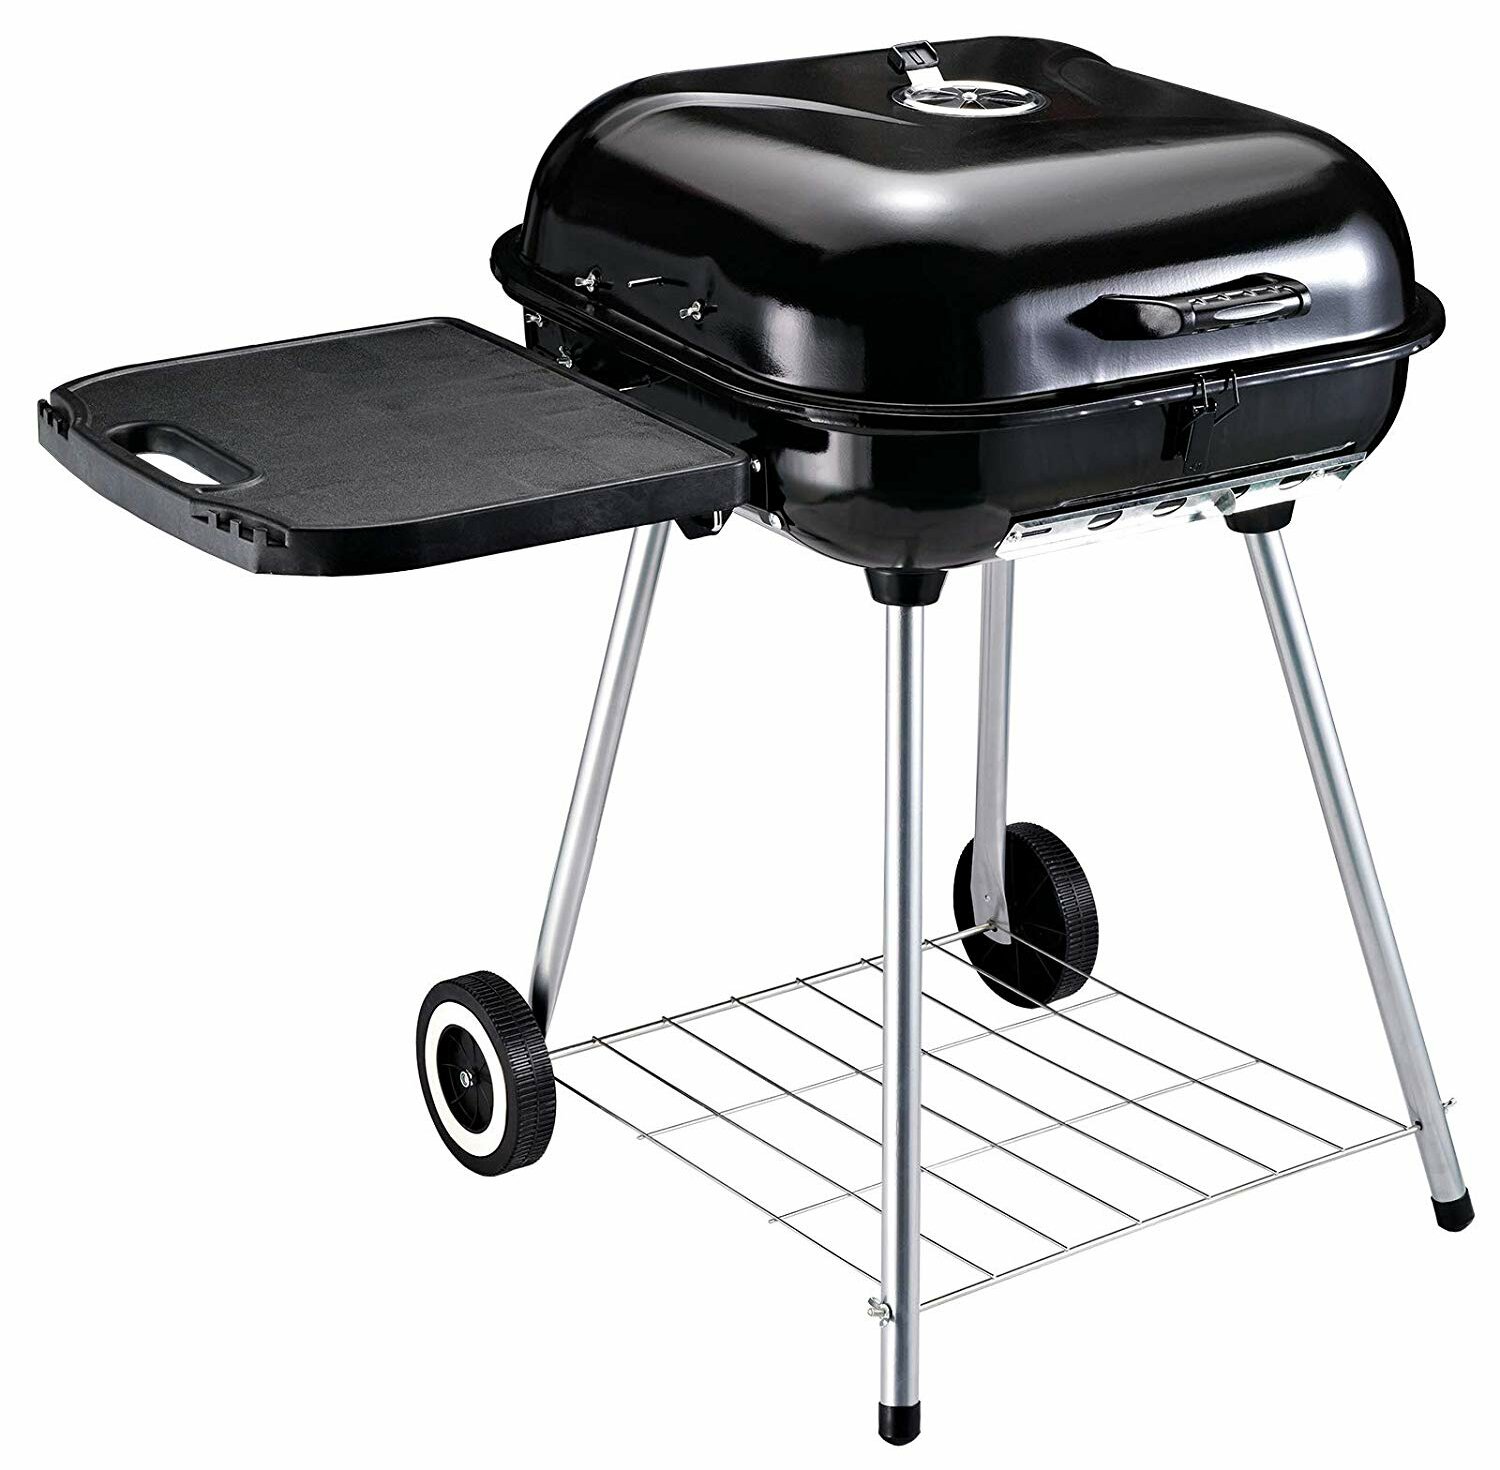 Outsunny Outdoor Cooking Grill Multifunctional Portable Charcoal